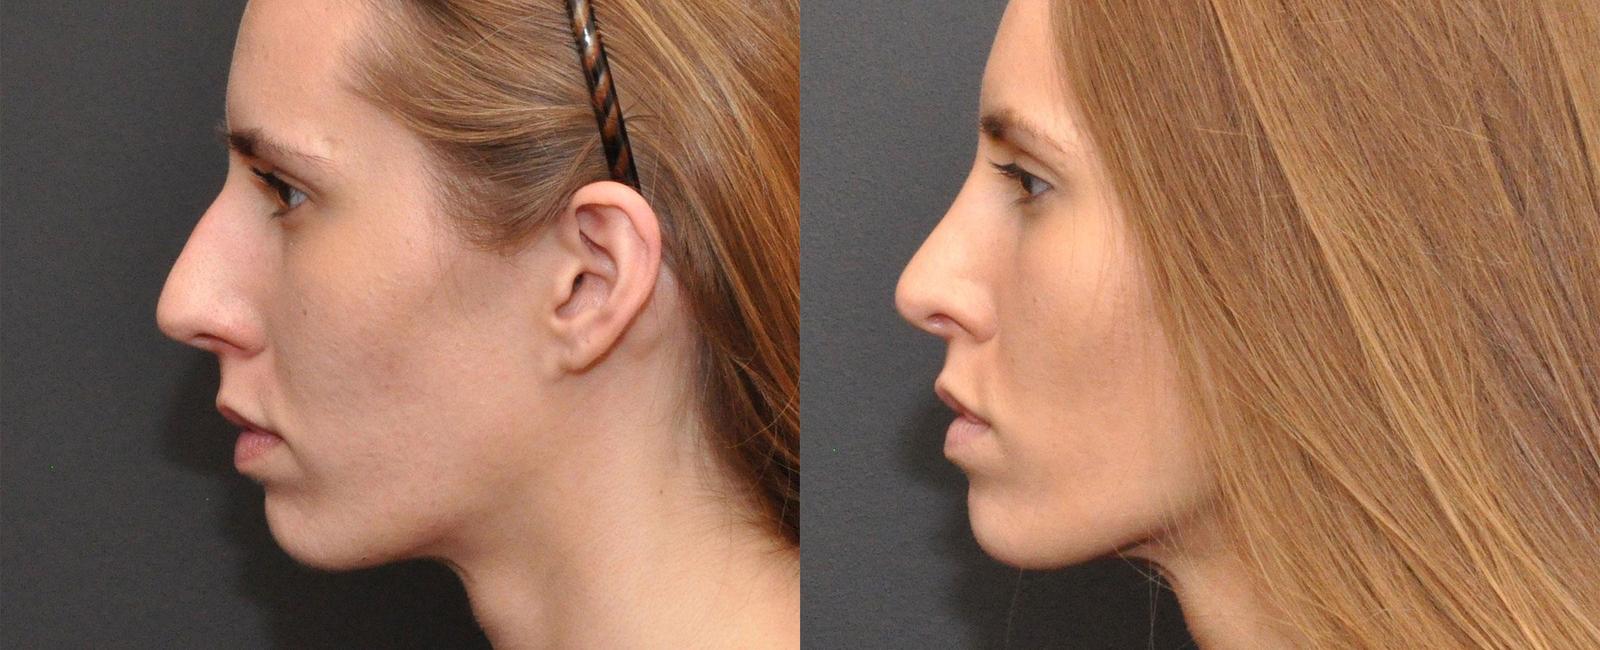 What body part is reshaped in plastic surgery known as rhinoplasty nose